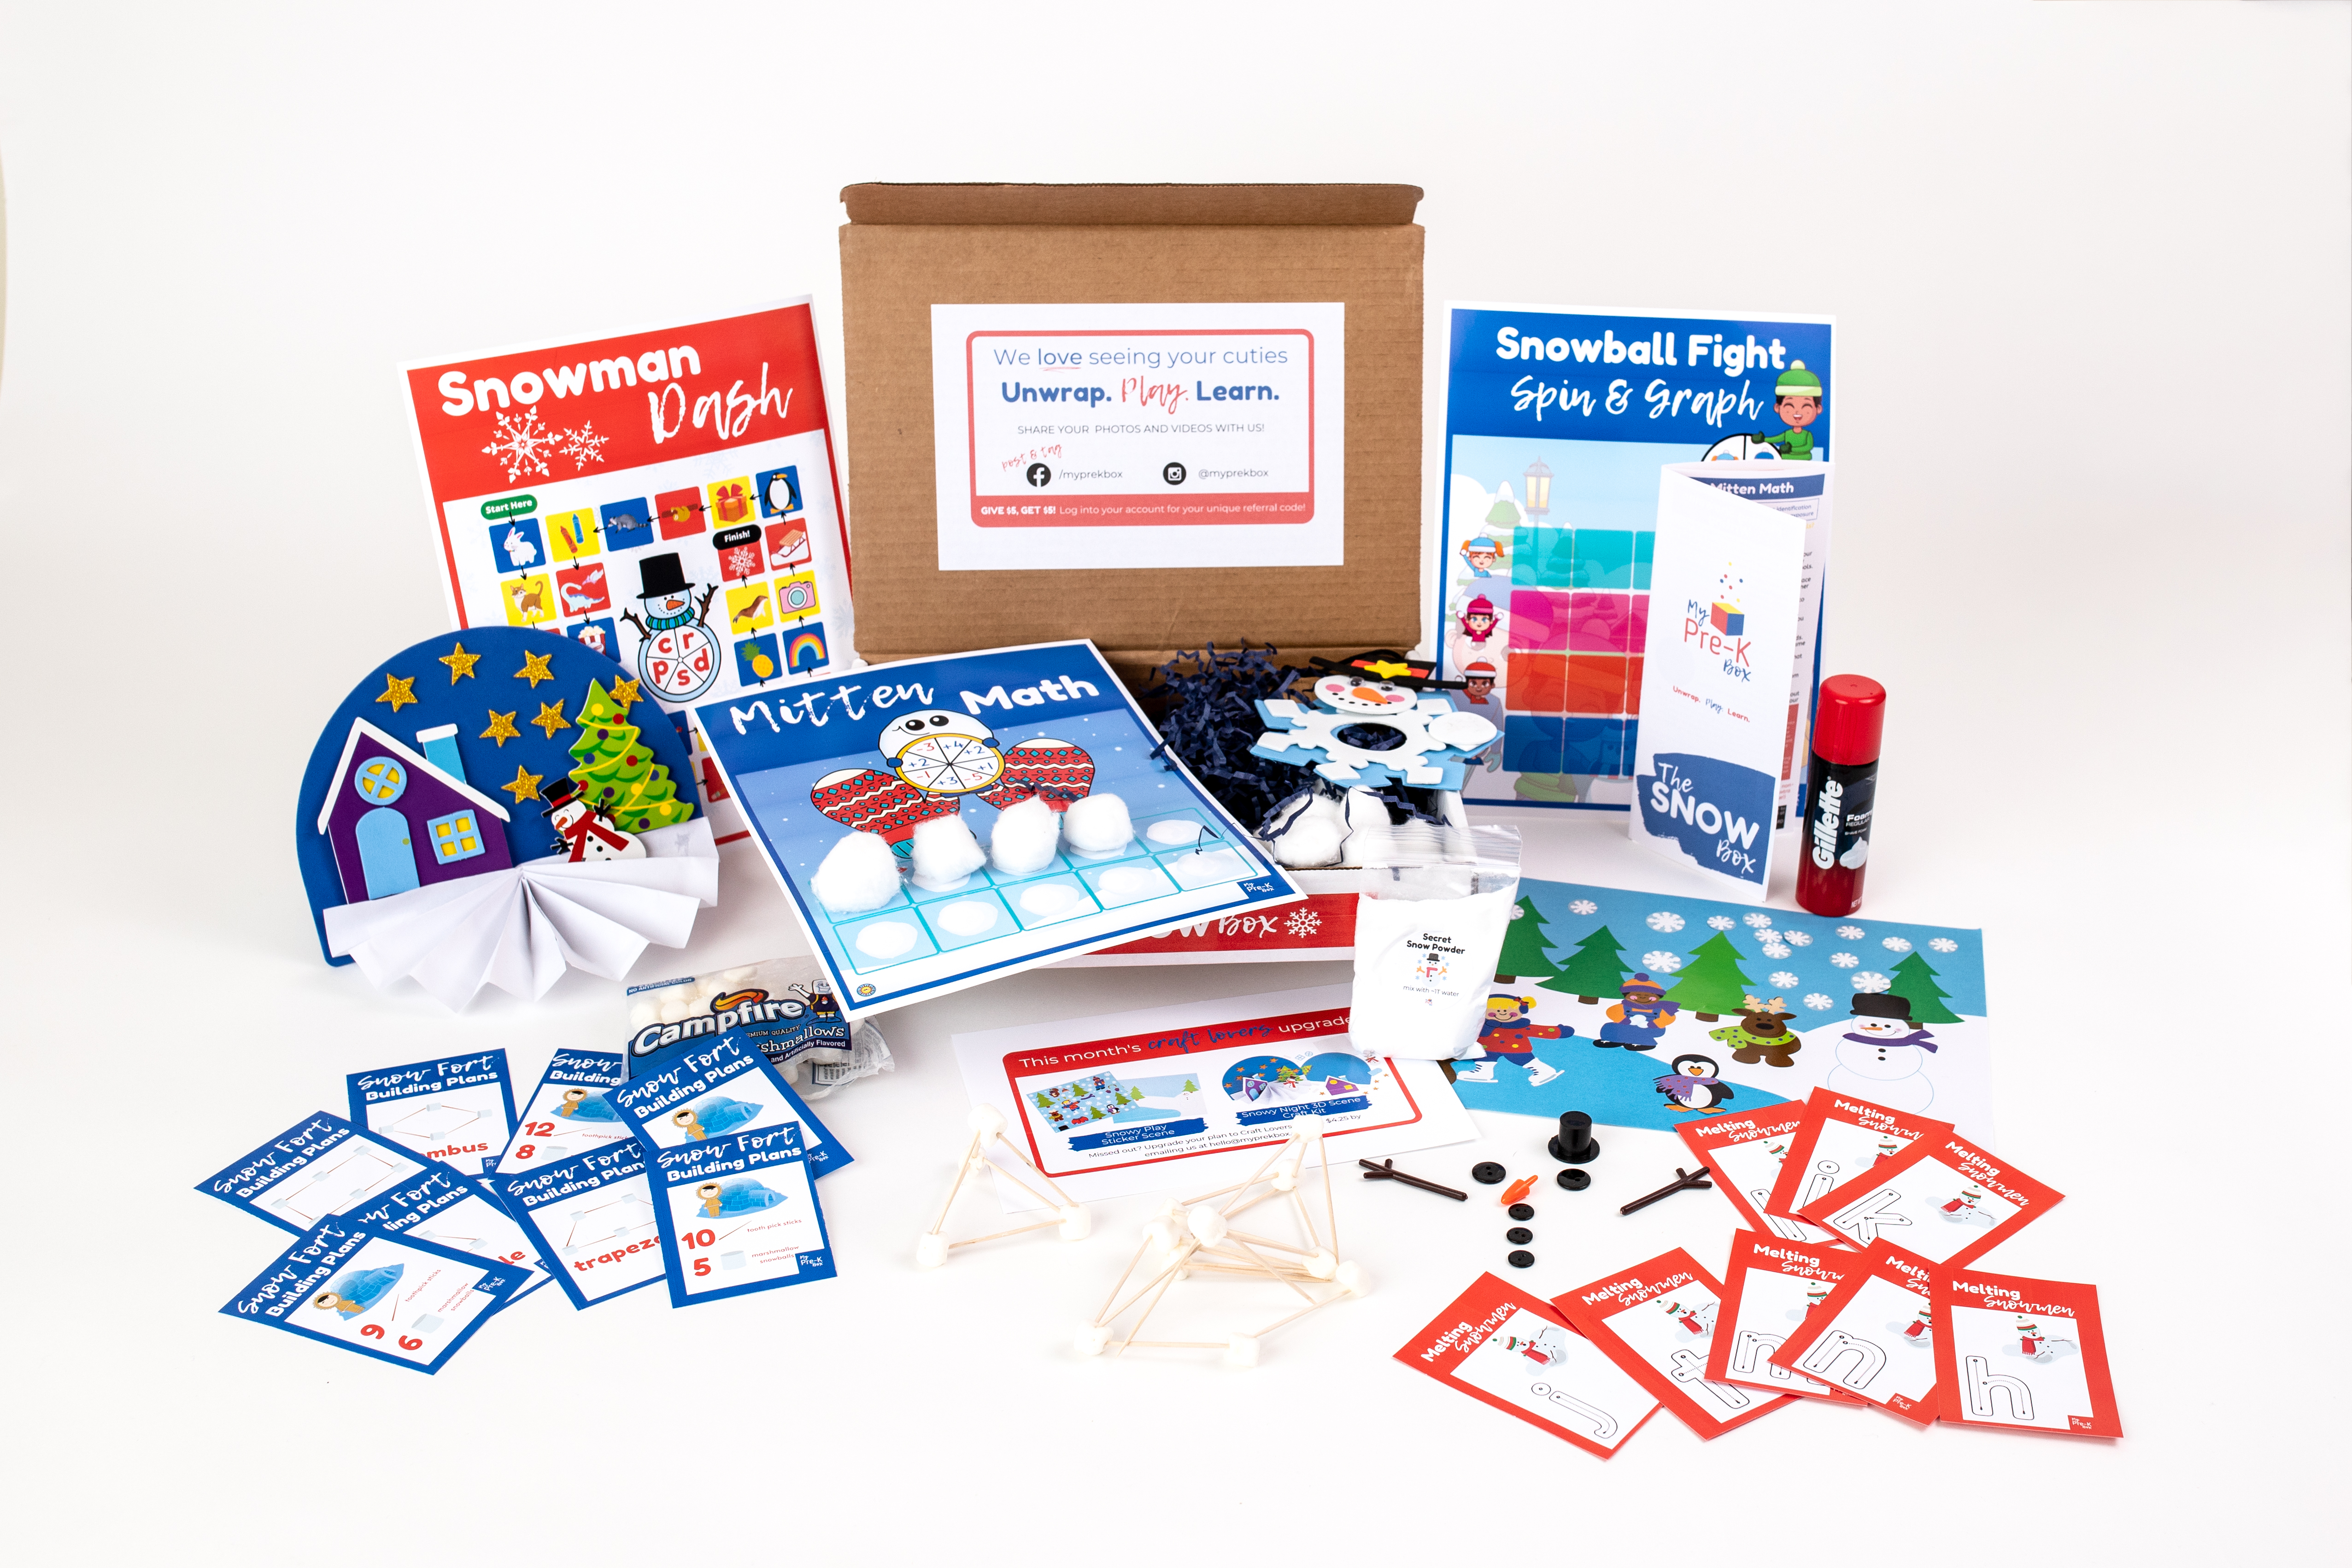 hands on learning activities, crafts, and experiments for kids